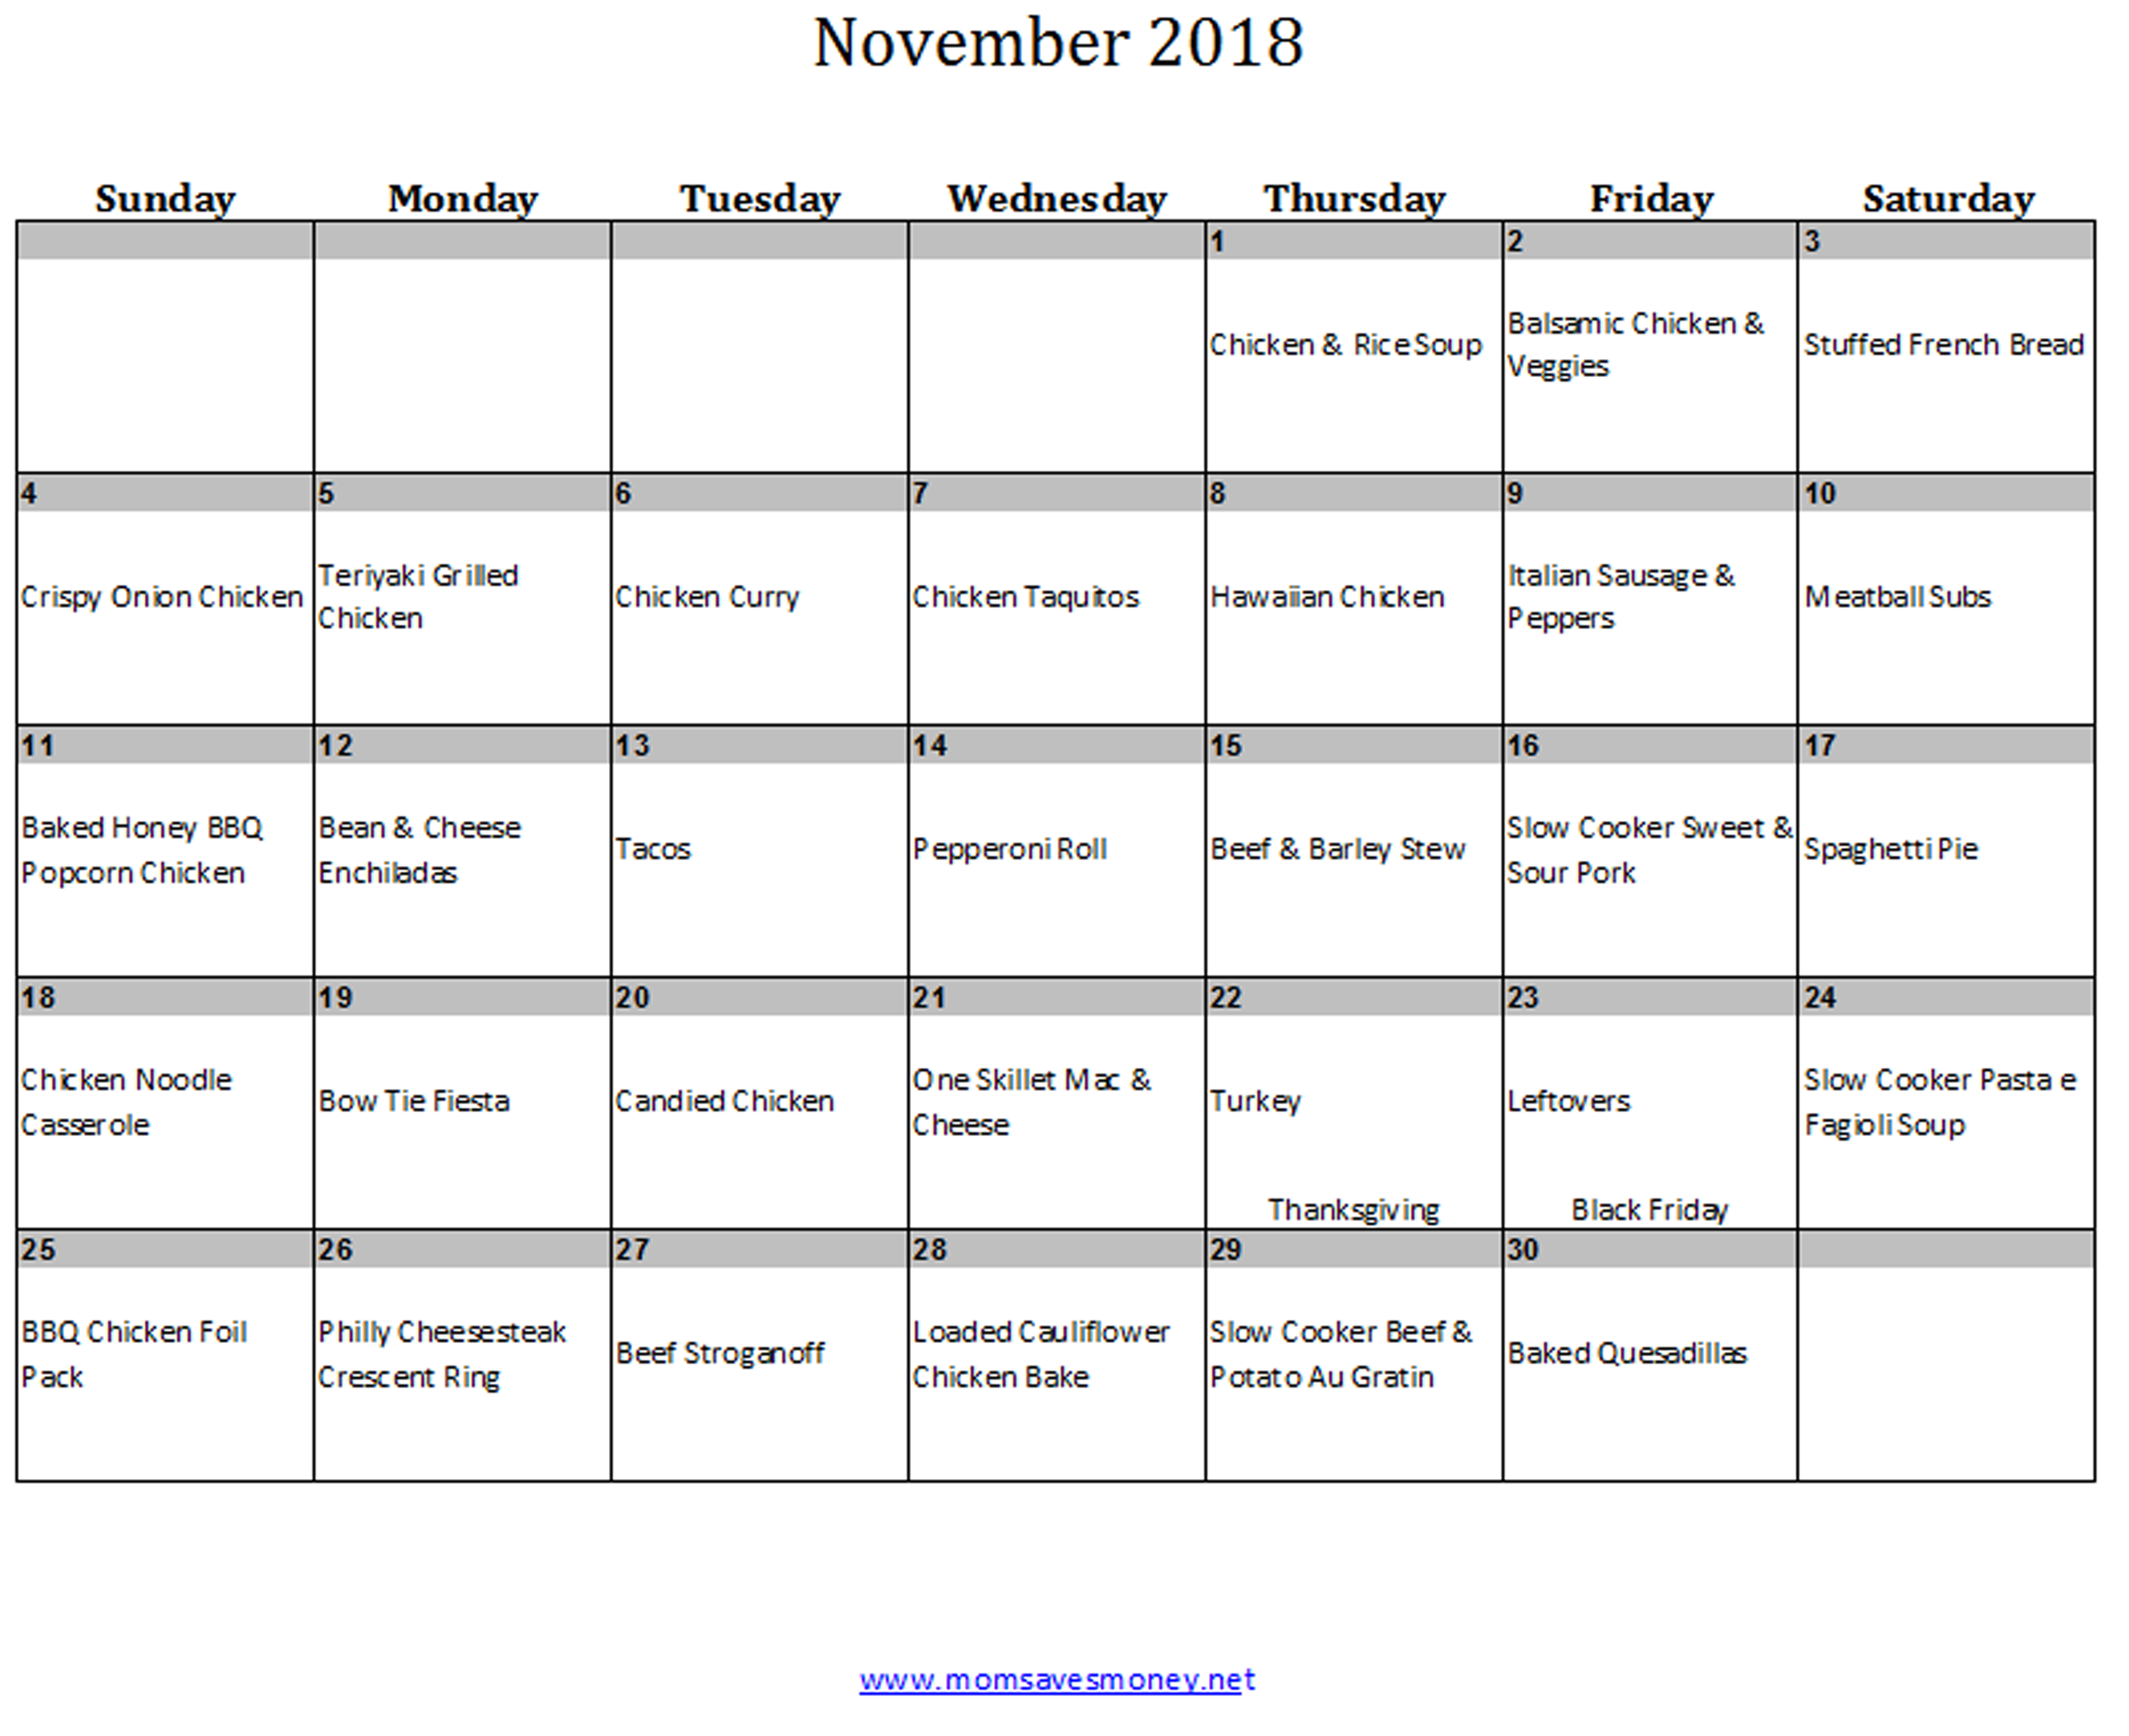 Start your holiday season with less stress in November 2018 with this menu plan! 30 days of easy, doable and yummy recipes! #mealplan #menuplan #easyrecipes #familyfriendlyrecipes